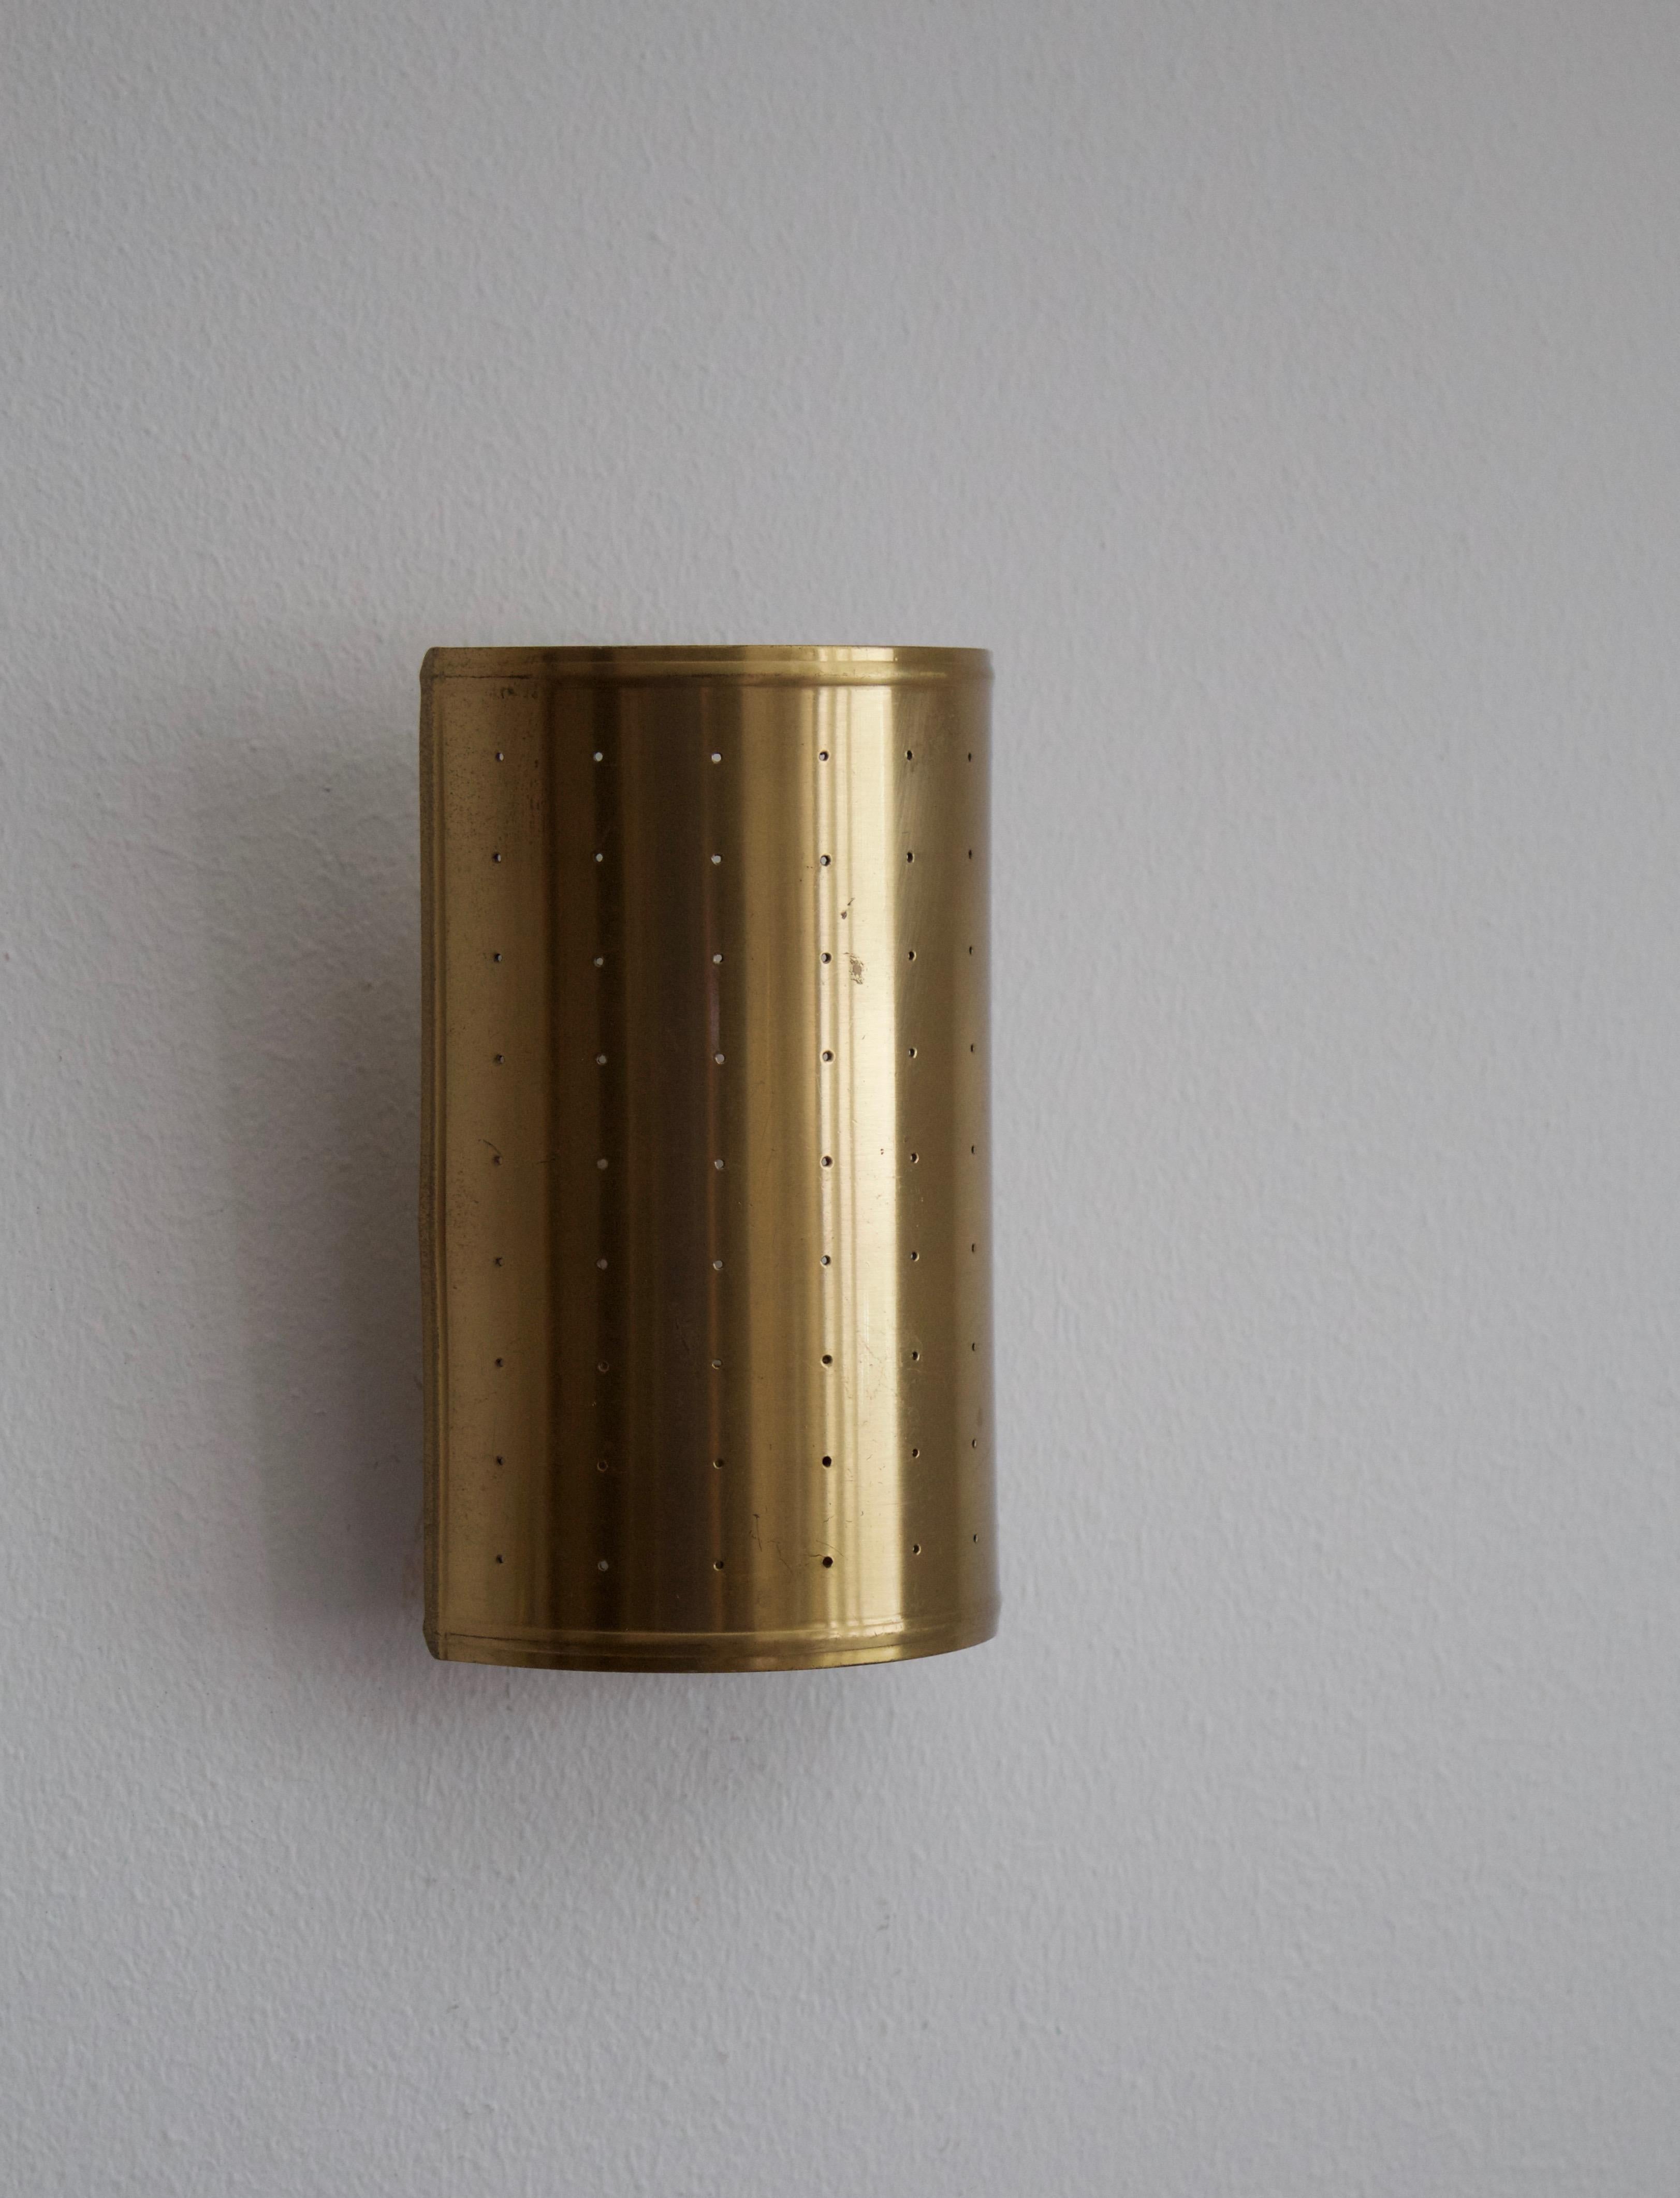 Mid-20th Century Swedish Designer, Small Wall Lights / Sconces, Perforated Brass, Sweden, 1940s